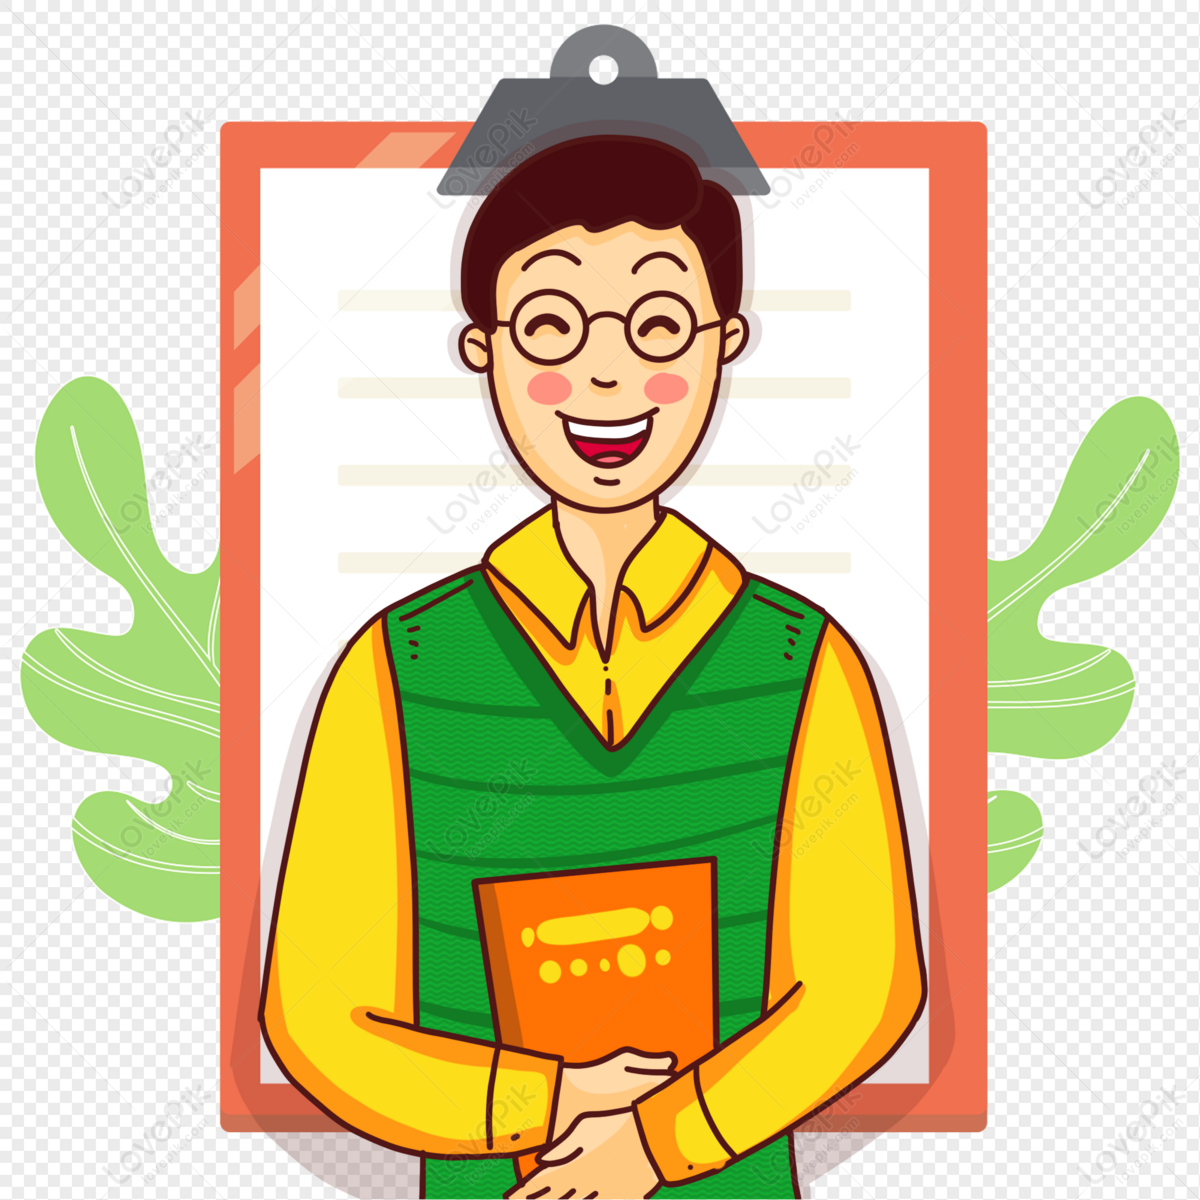 Cartoon Male Teacher Picture PNG Transparent And Clipart Image For Free  Download - Lovepik | 401479936